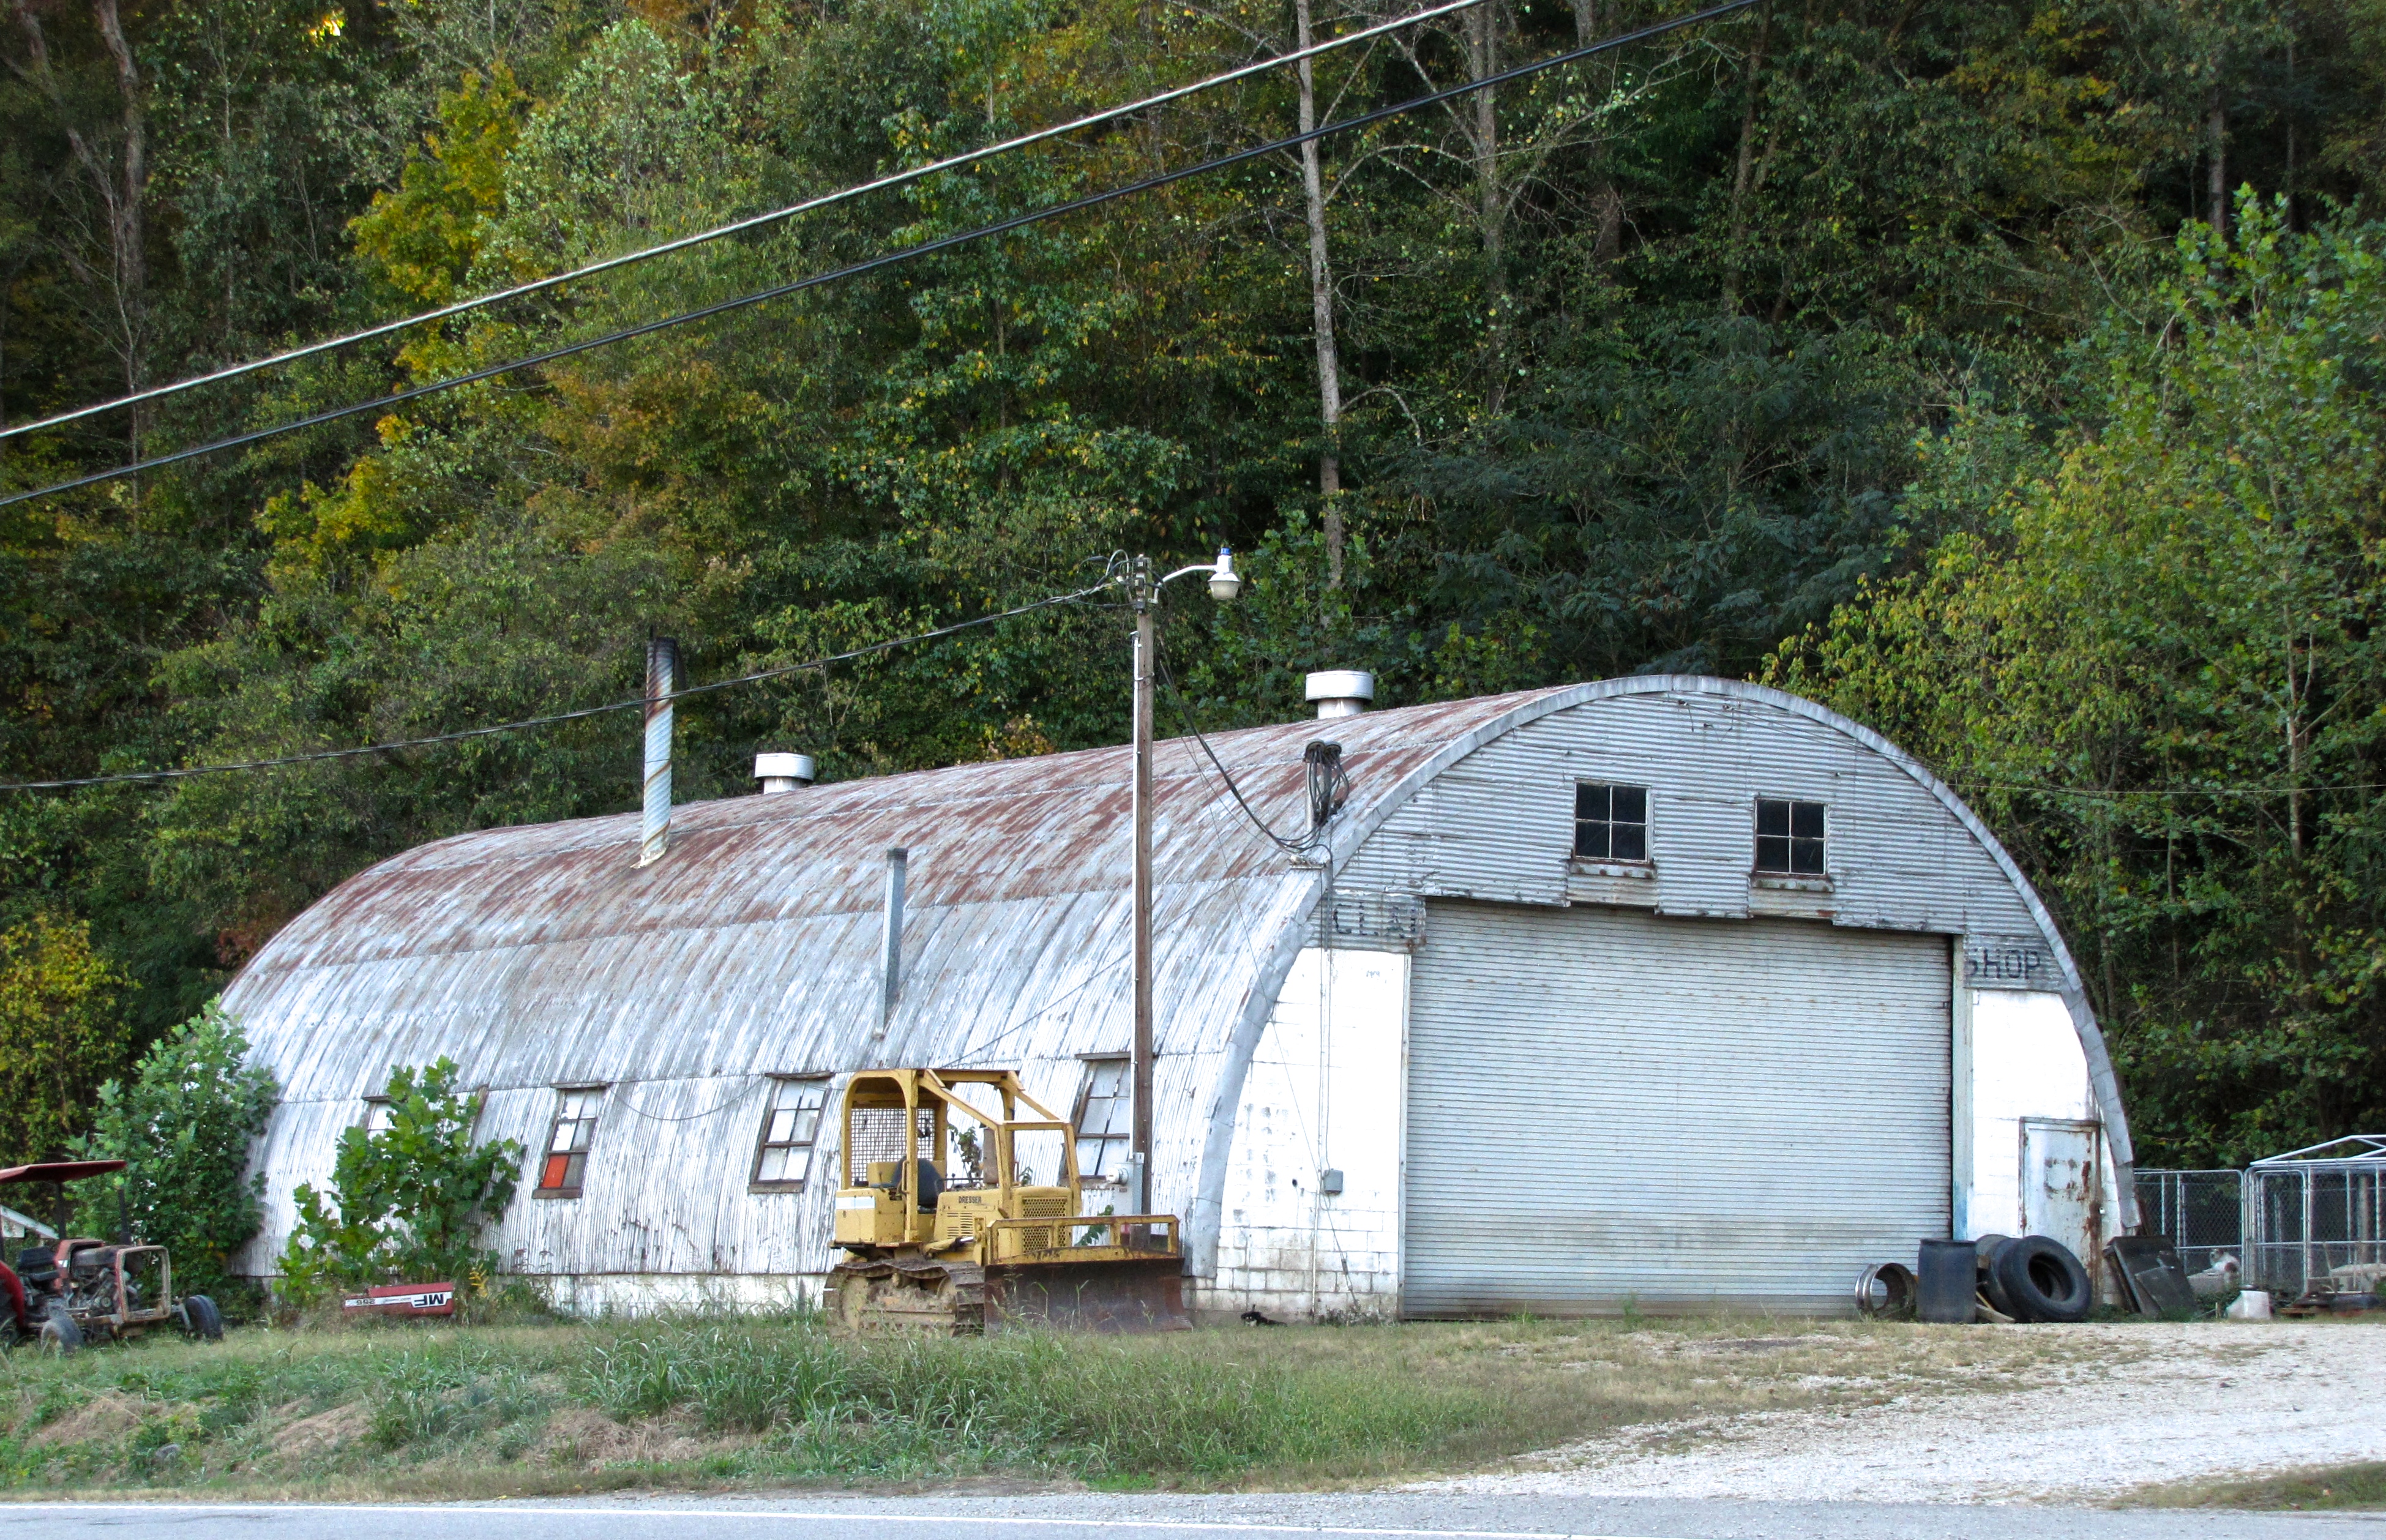 quonset hut in Coal Township, PA